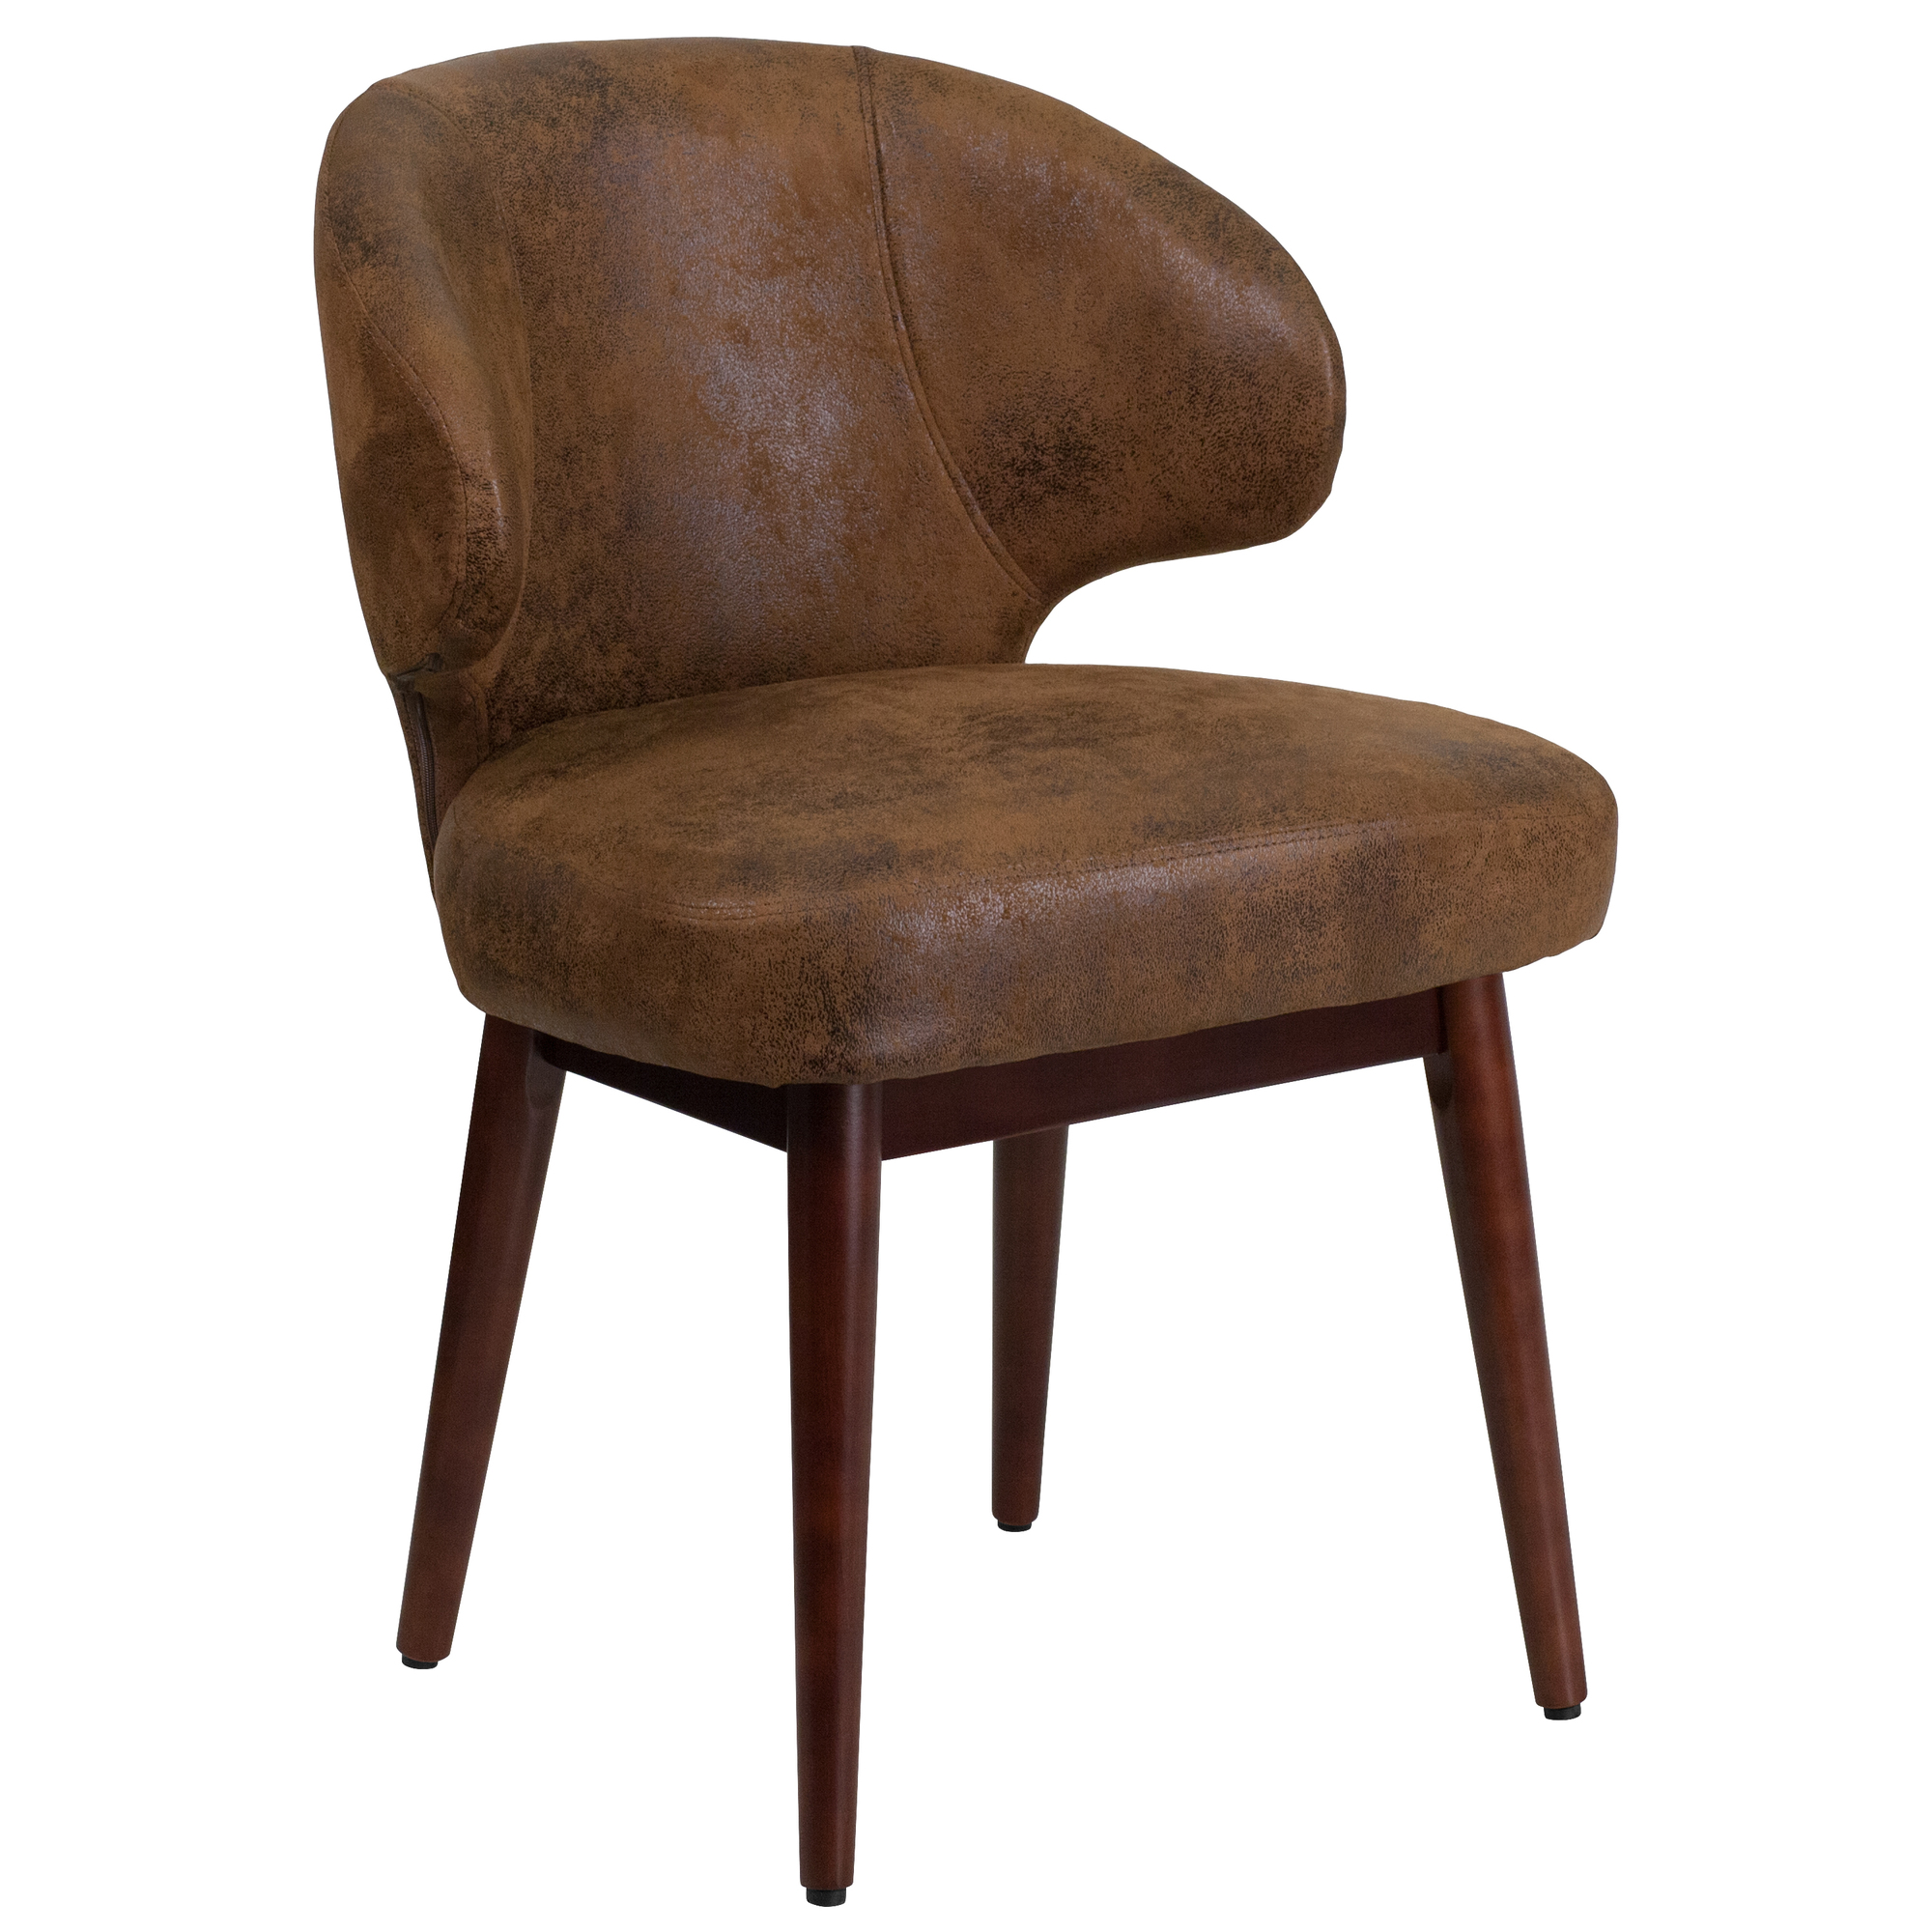 Flash Furniture, Bomber Jacket Microfiber Chair with Walnut Legs, Primary Color Brown, Included (qty.) 1, Model BT5BOM